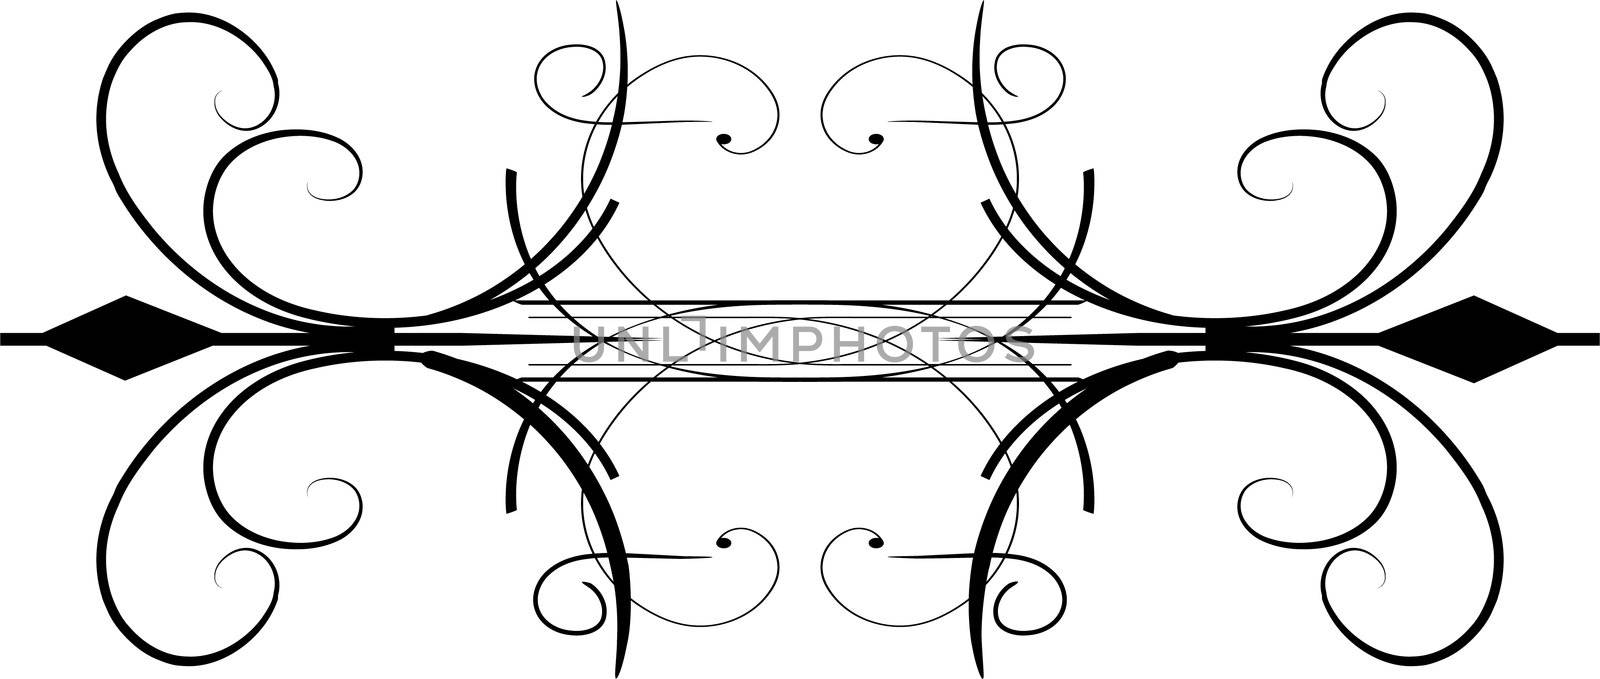 Classic decorative elements with a white background. Great to add that final touch to your design.